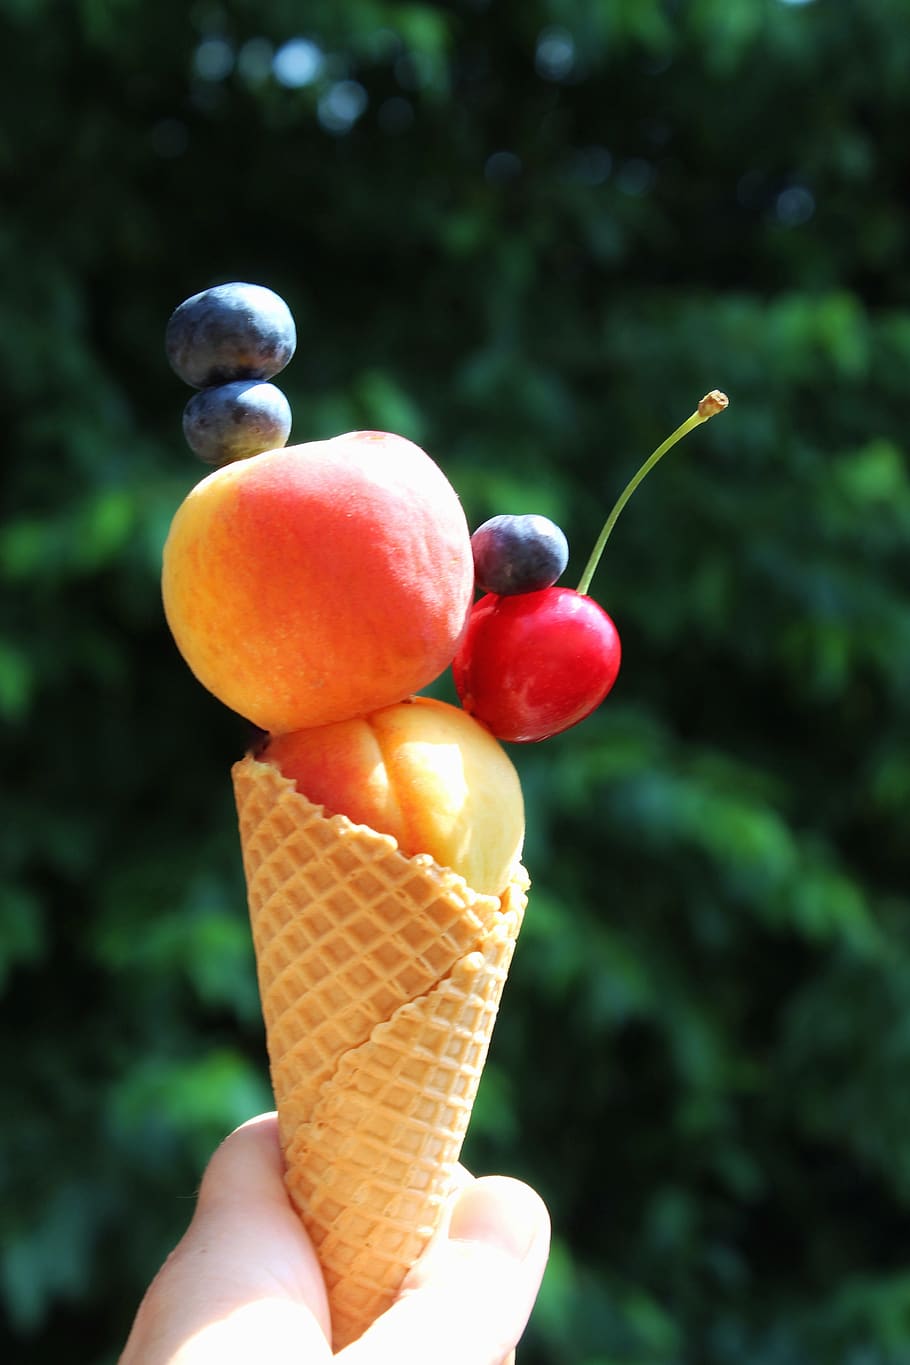 ice cream cone, waffle cone, ice, fruit, healthy, nutrition, apricot, cherry, blueberry, fruit salad